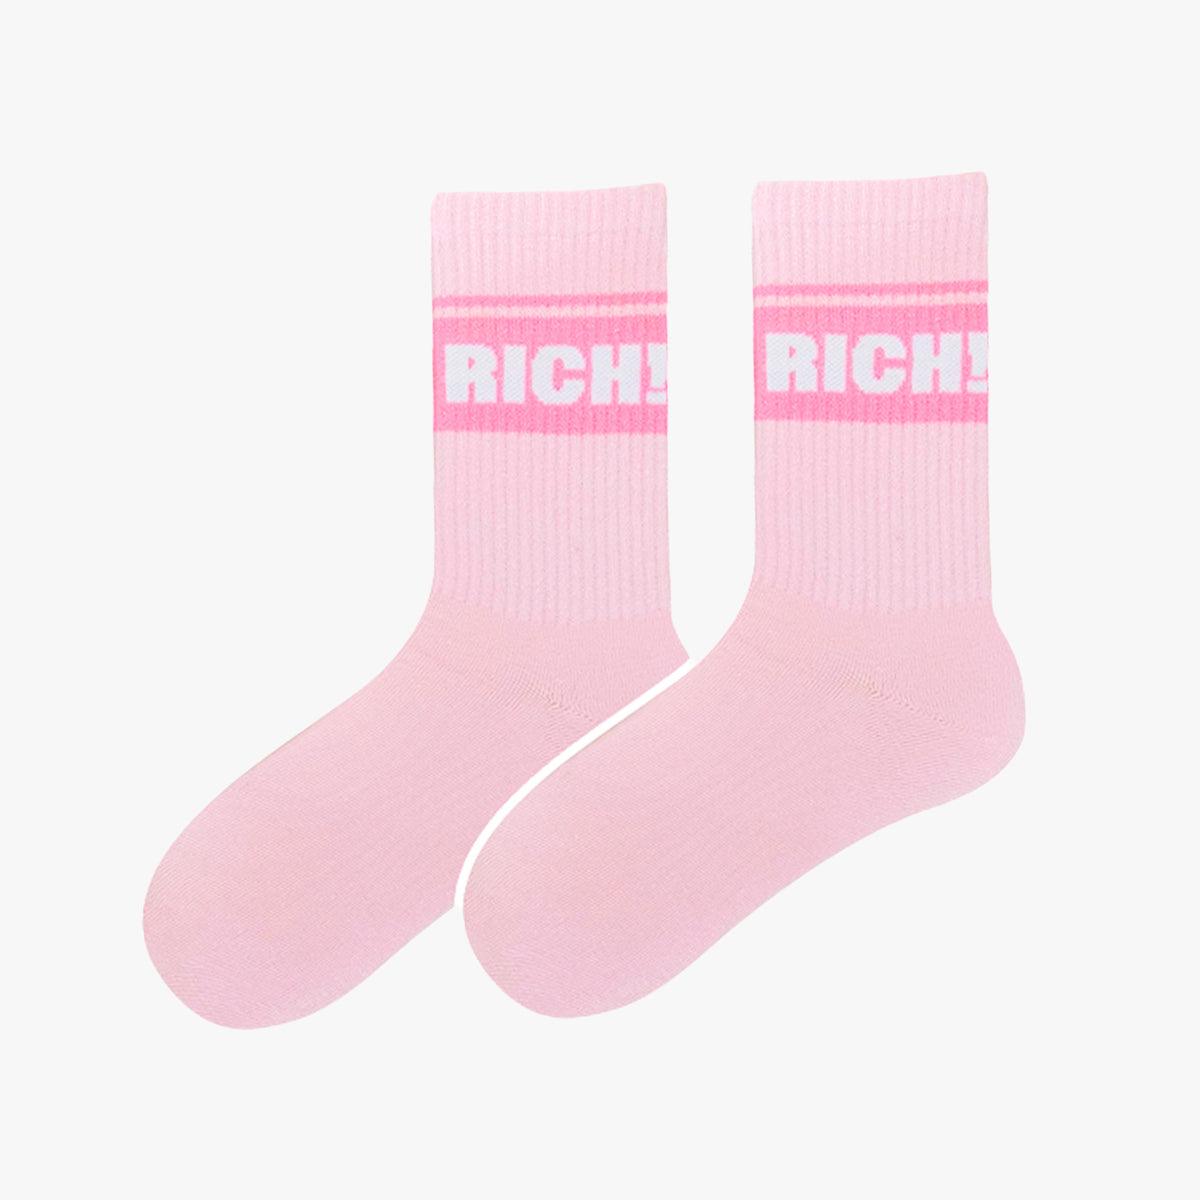 Rich Rich Aesthetic Socks - Aesthetic Clothes Shop